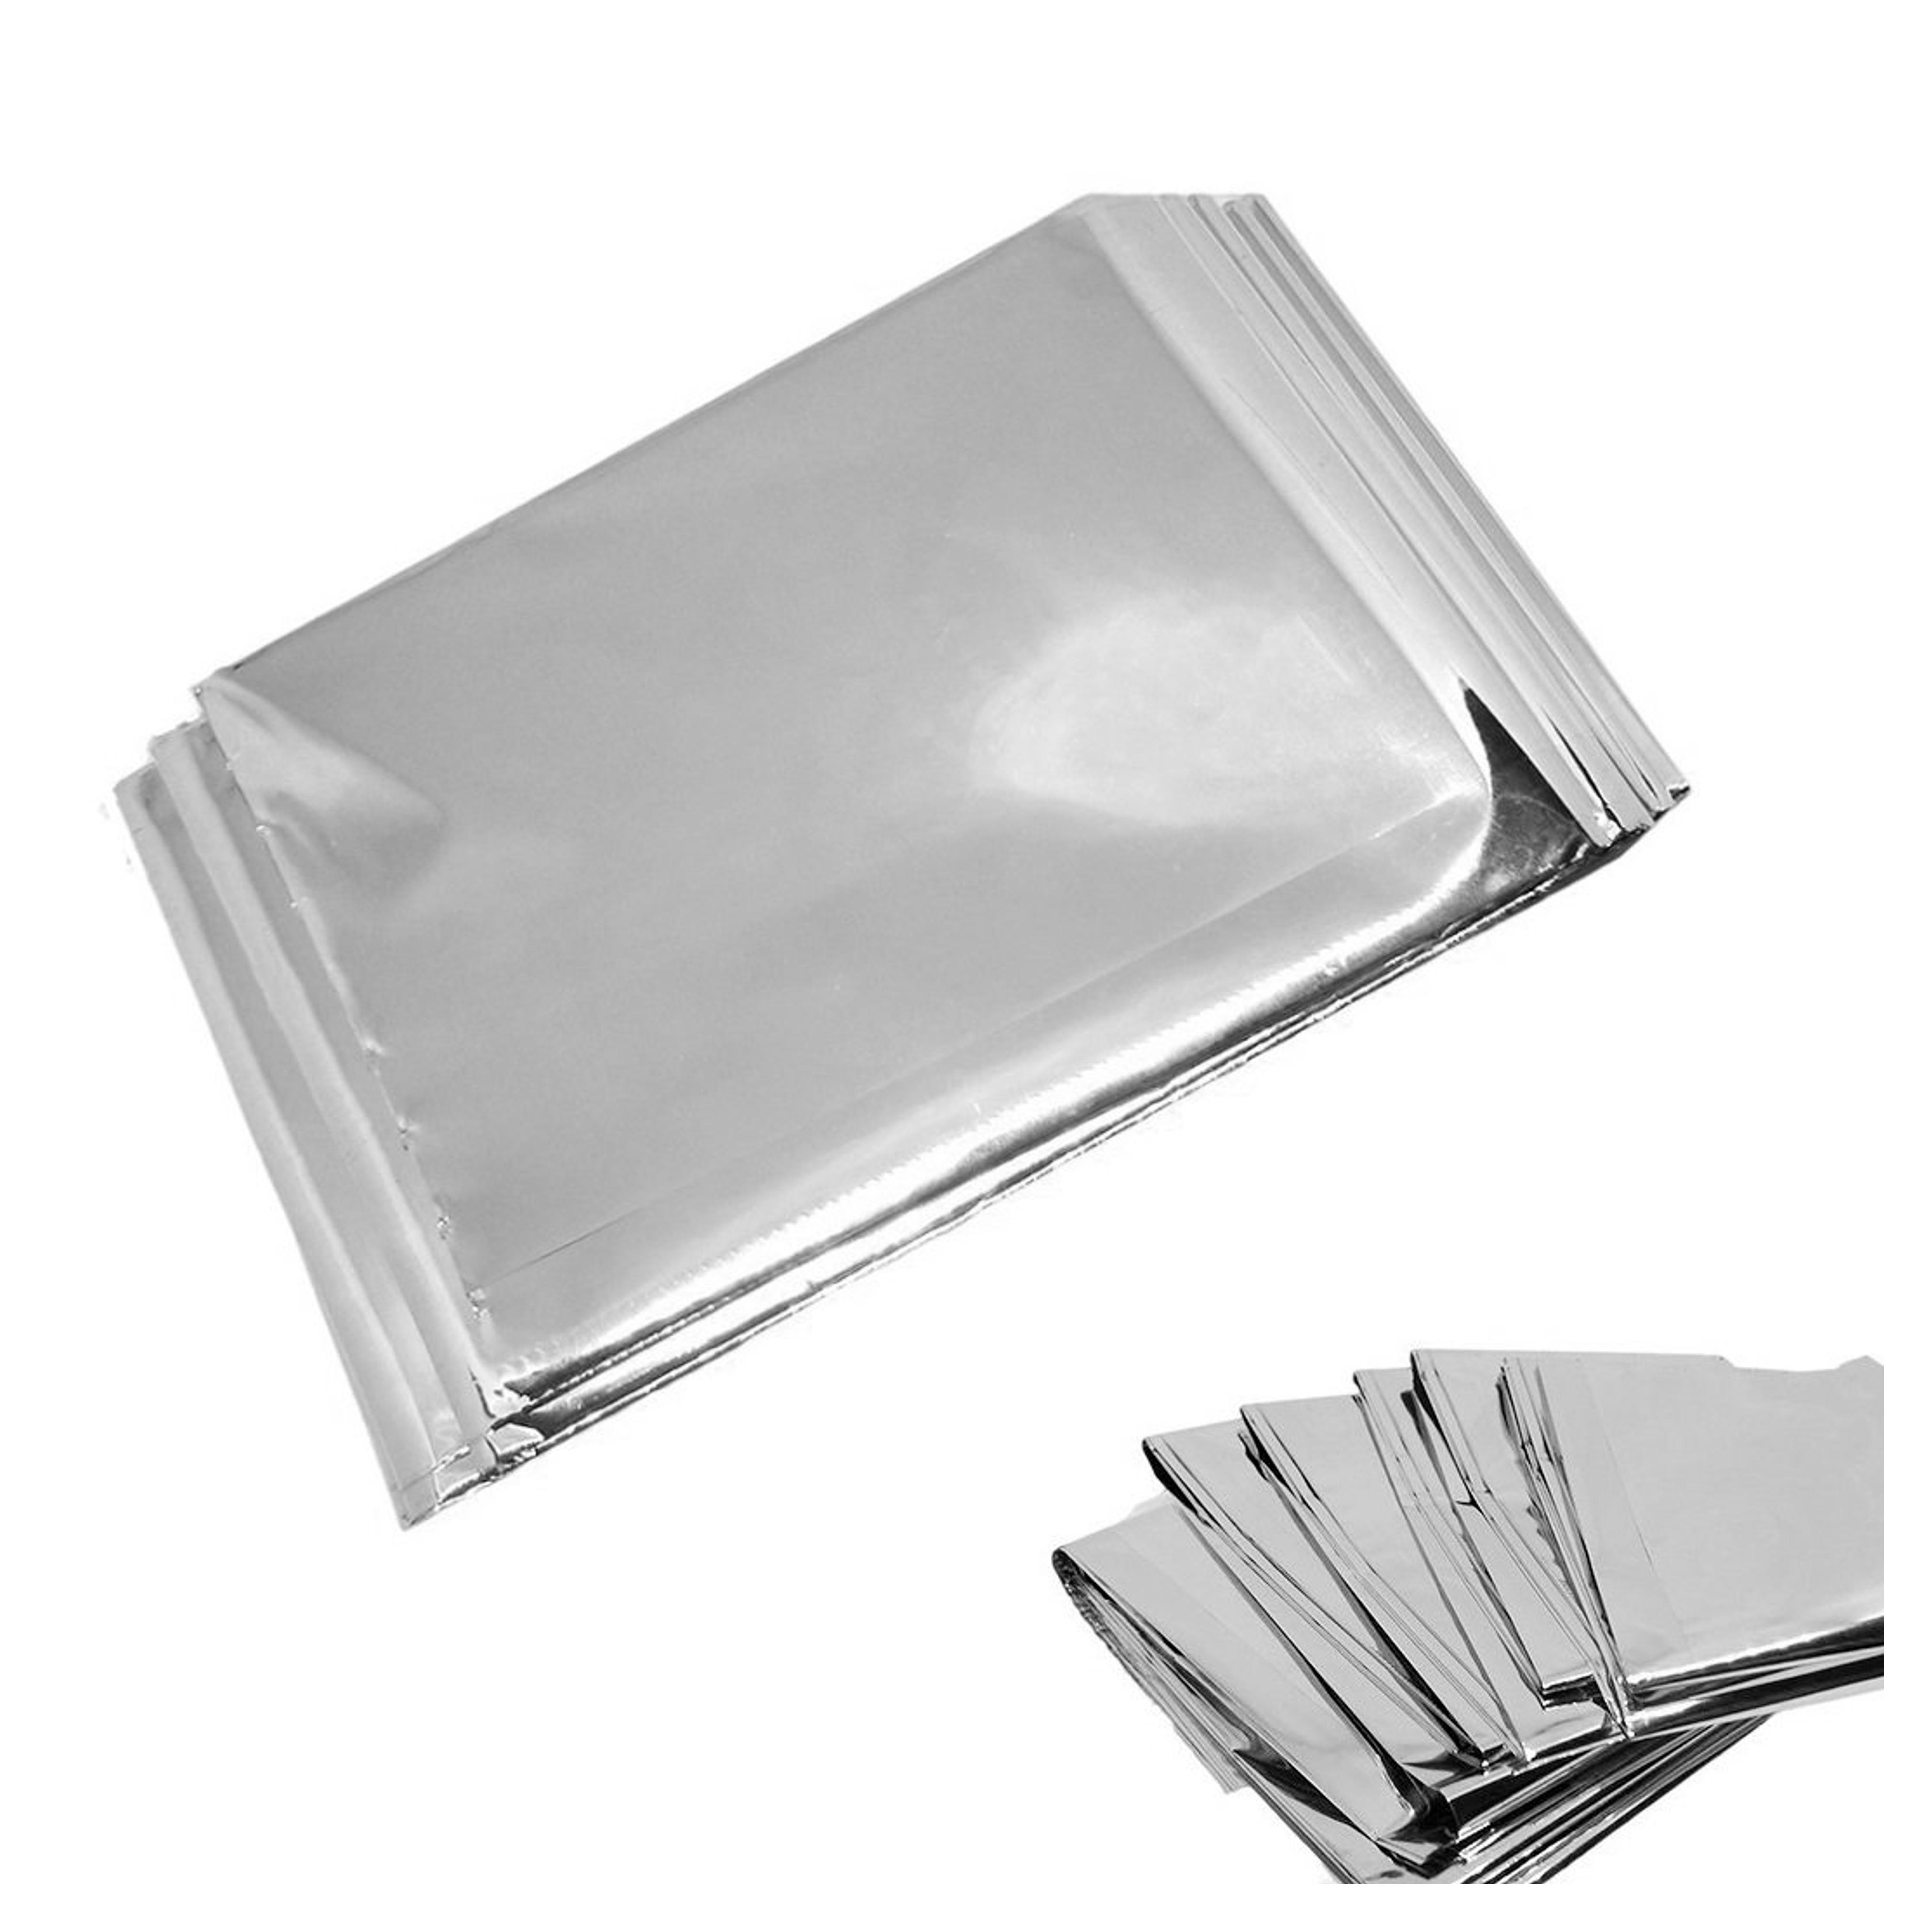 Amazon.com : Emergency Mylar Blankets - 84" X 52"(4 Pack) : Emergency Camping Blankets : Sports & Outdoors